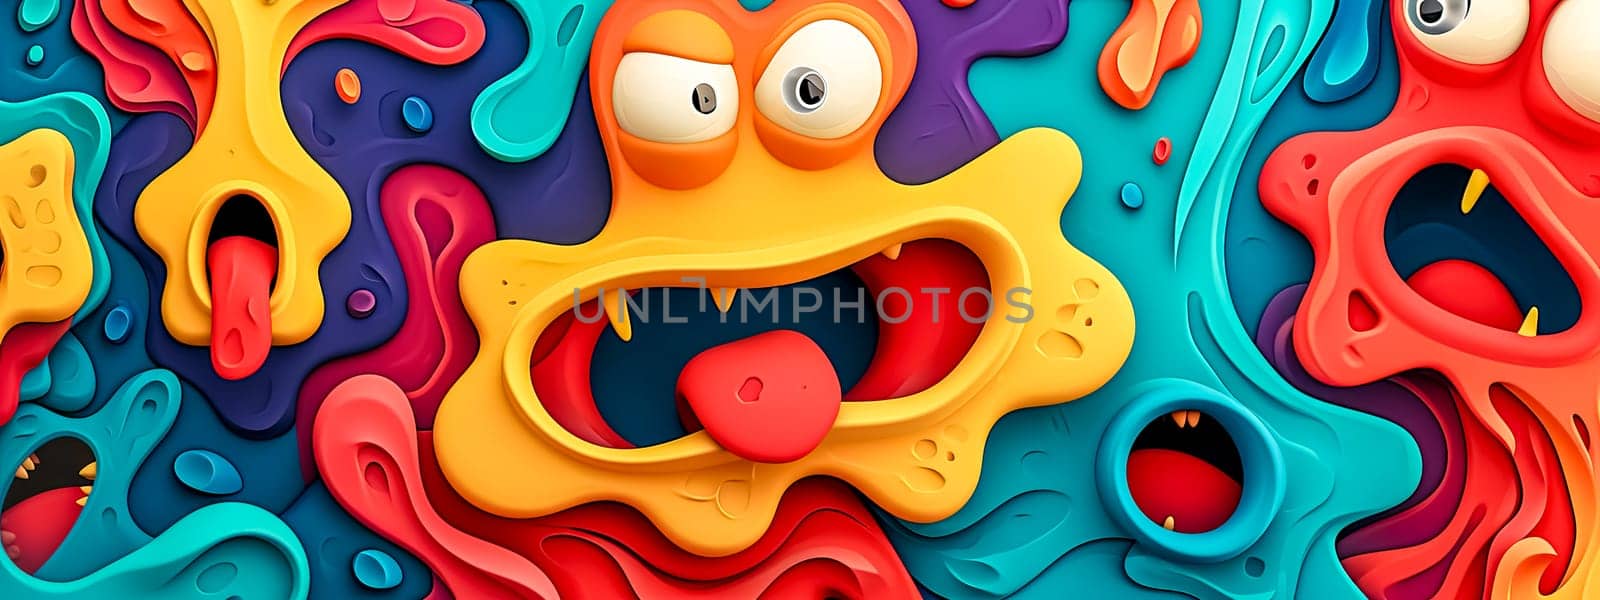 abstract design with various anthropomorphic shapes resembling expressive cartoon faces in a seamless pattern. by Edophoto